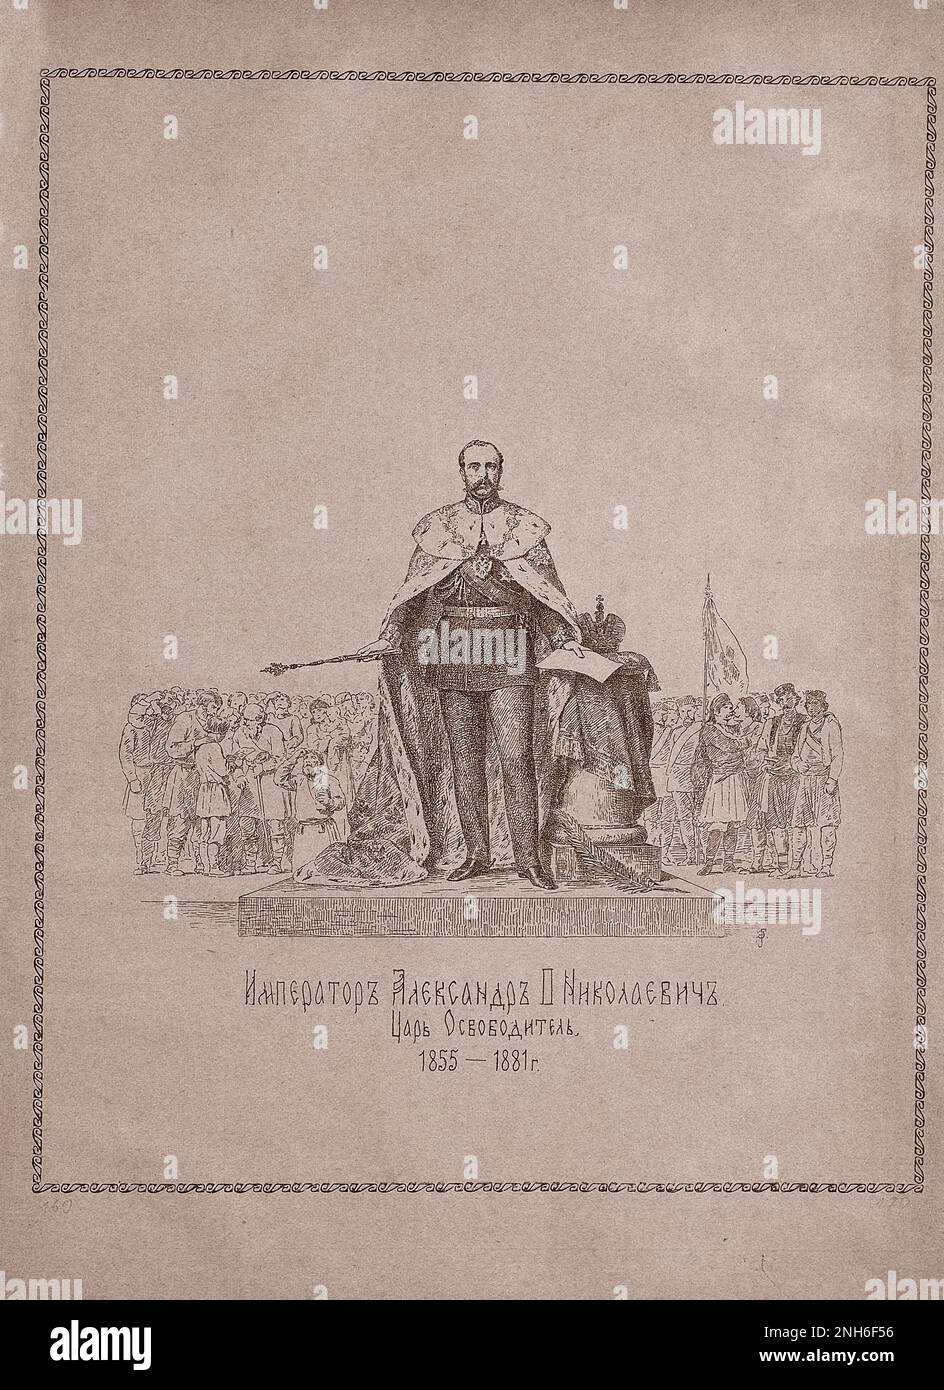 Engraving of Alexander II of Russia. 1913 Alexander II (1818–1881) was Emperor of Russia, King of Poland and Grand Duke of Finland from 2 March 1855 until his assassination in 1881. Stock Photo